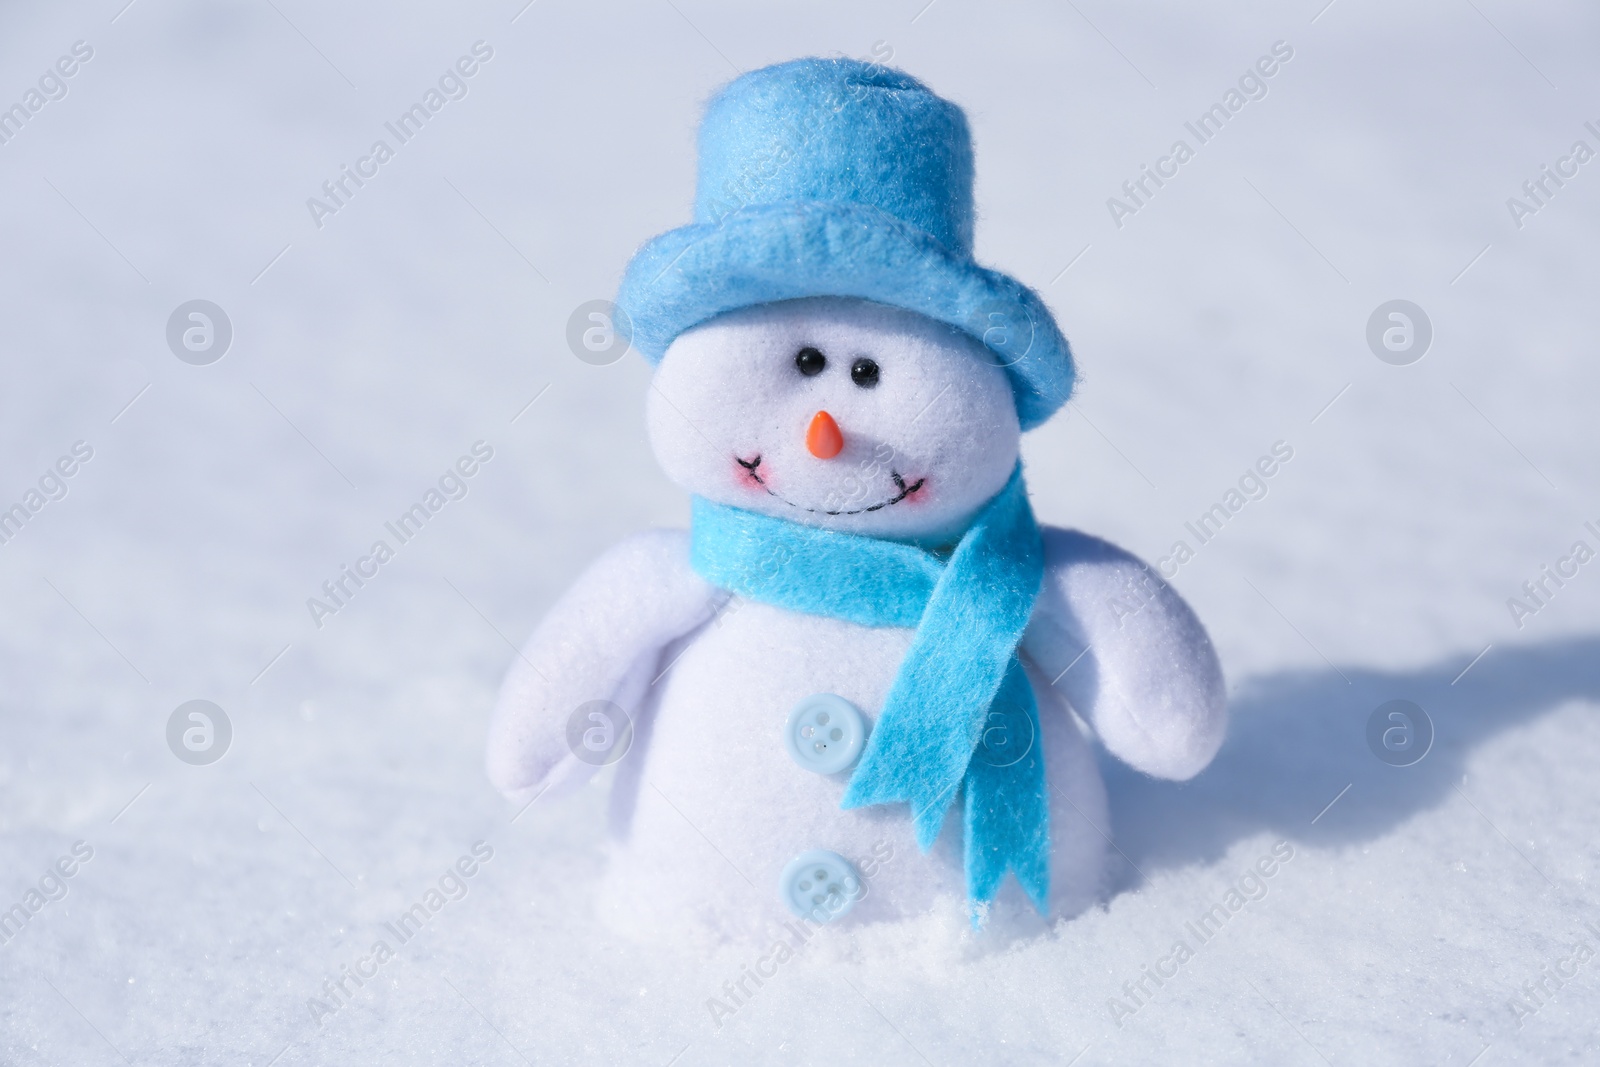 Photo of Cute small decorative snowman on snow outdoors